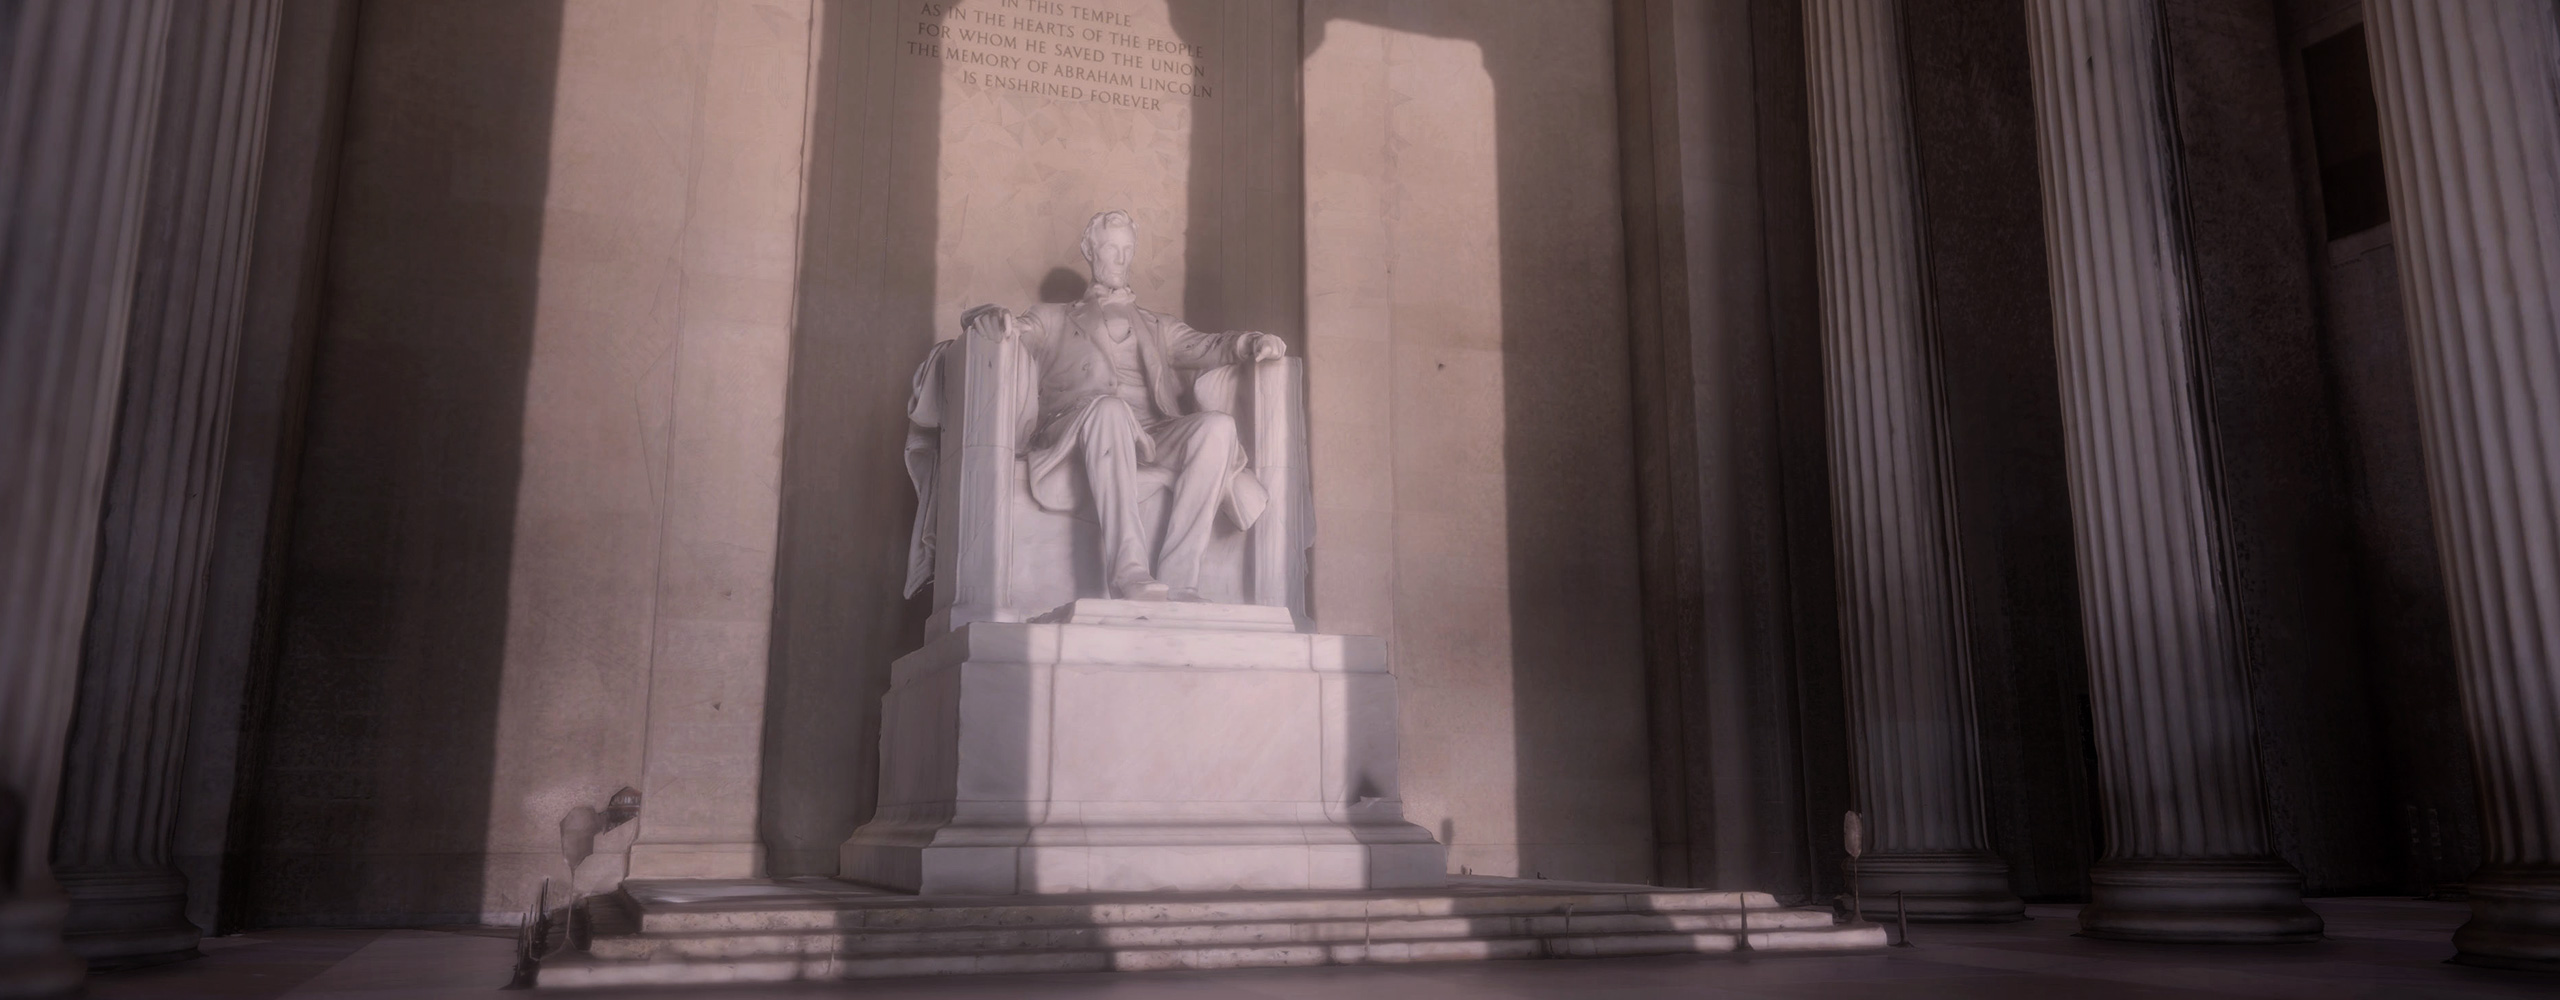 Room Scale VR - Lincoln Memorial